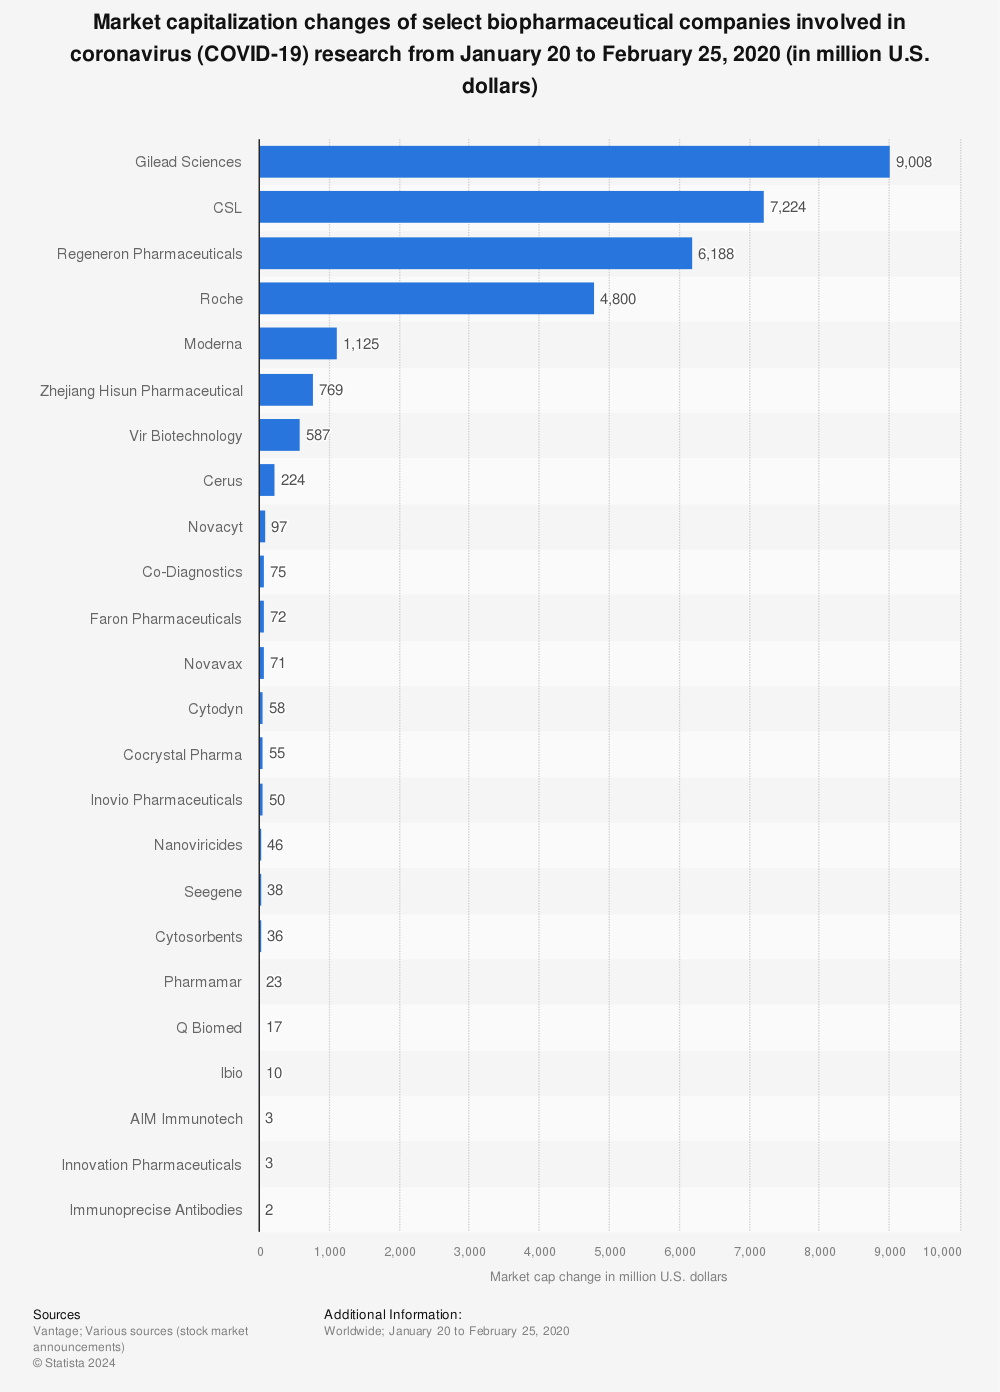 Statistic: Market capitalization changes of select biopharmaceutical companies involved in coronavirus (COVID-19) research from January 20 to February 25, 2020 (in million U.S. dollars) | Statista